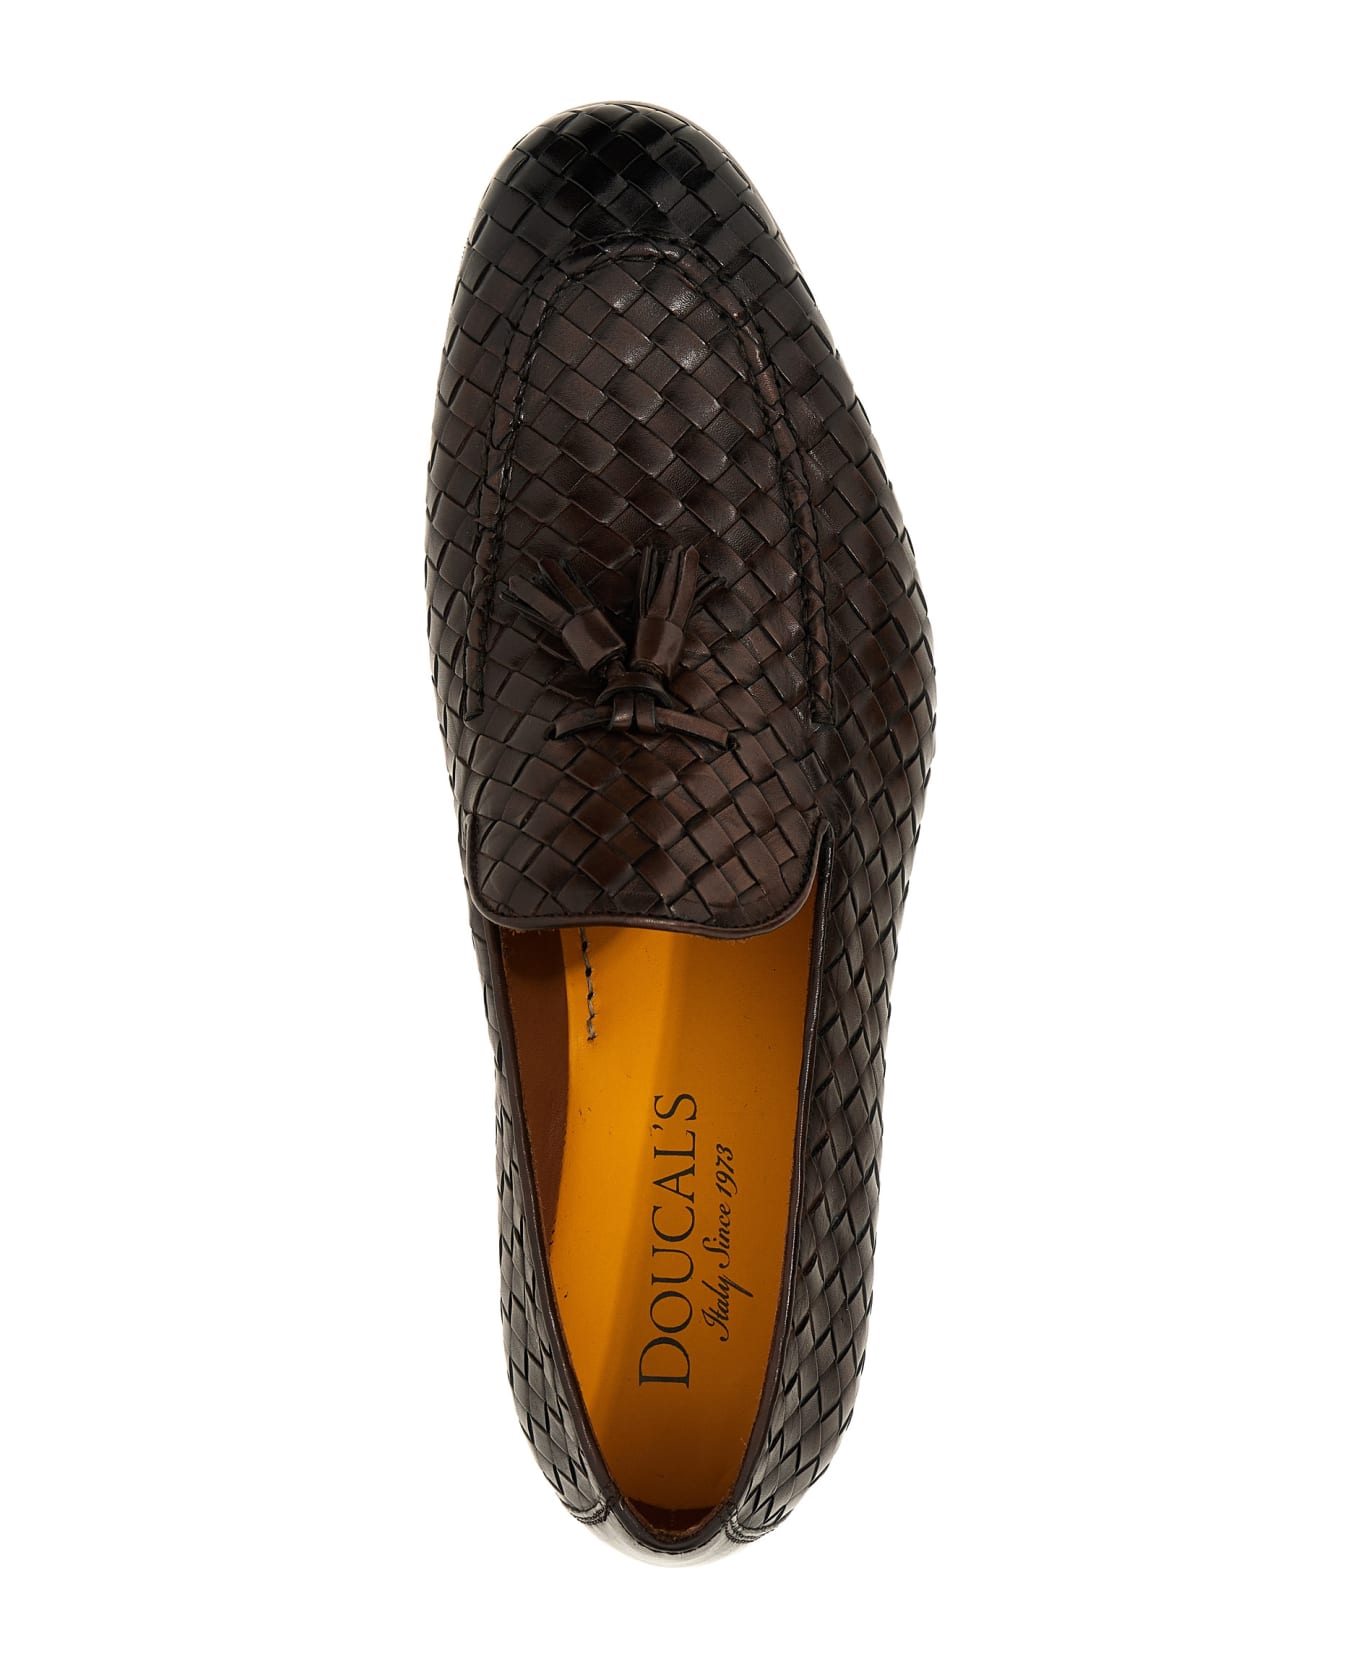 Doucal's Braided Loafers - Brown